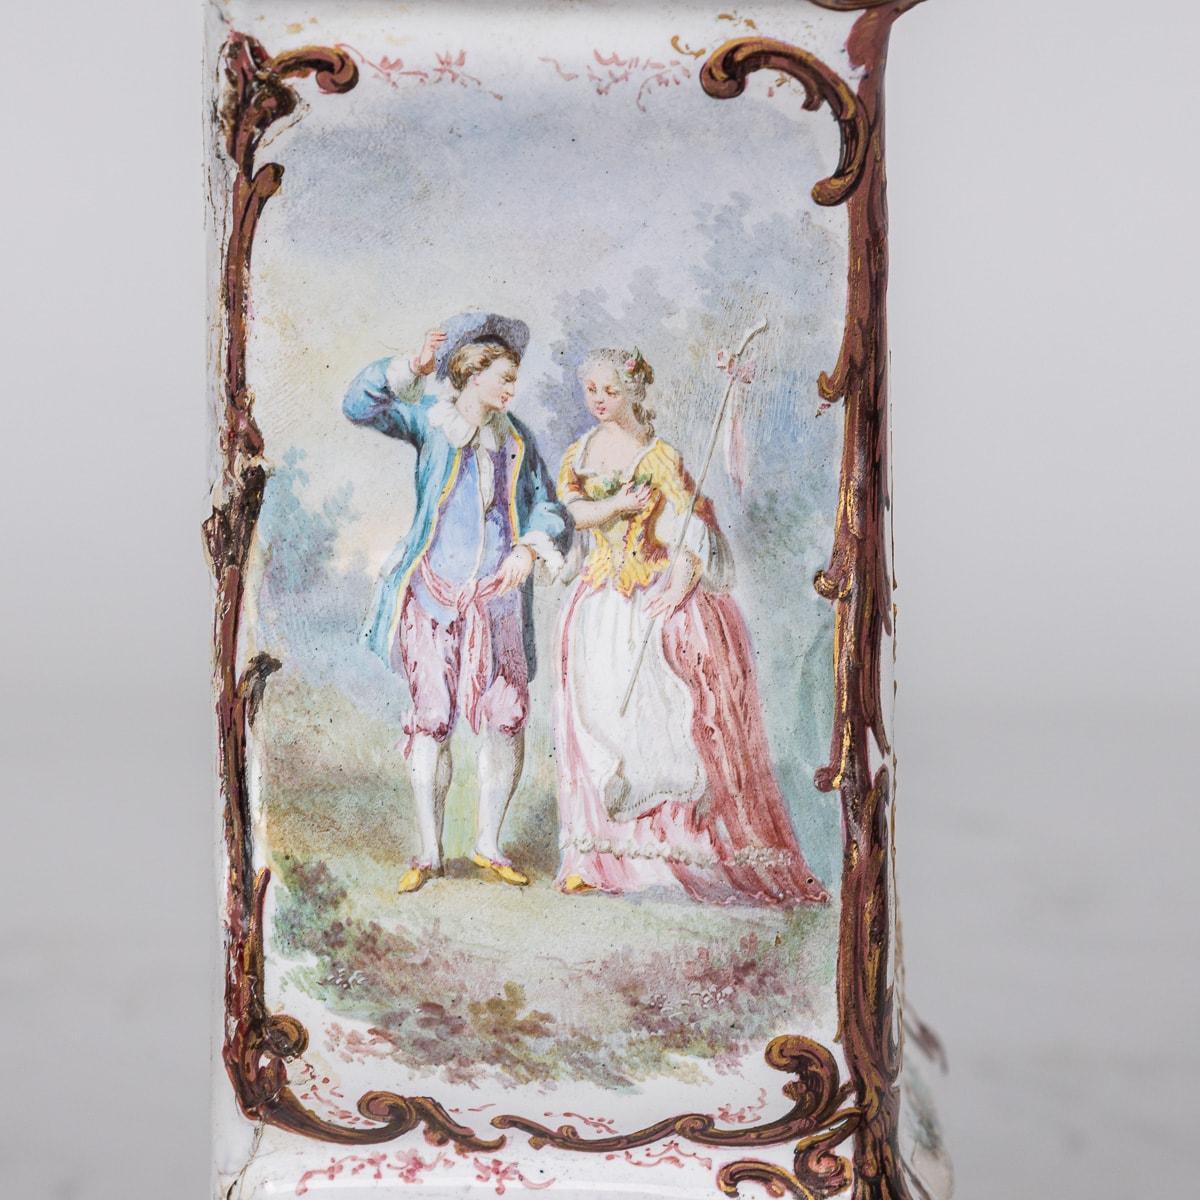 18th Century English Enamel Table Clock With Floral & Romantic Scenes c.1770 For Sale 12